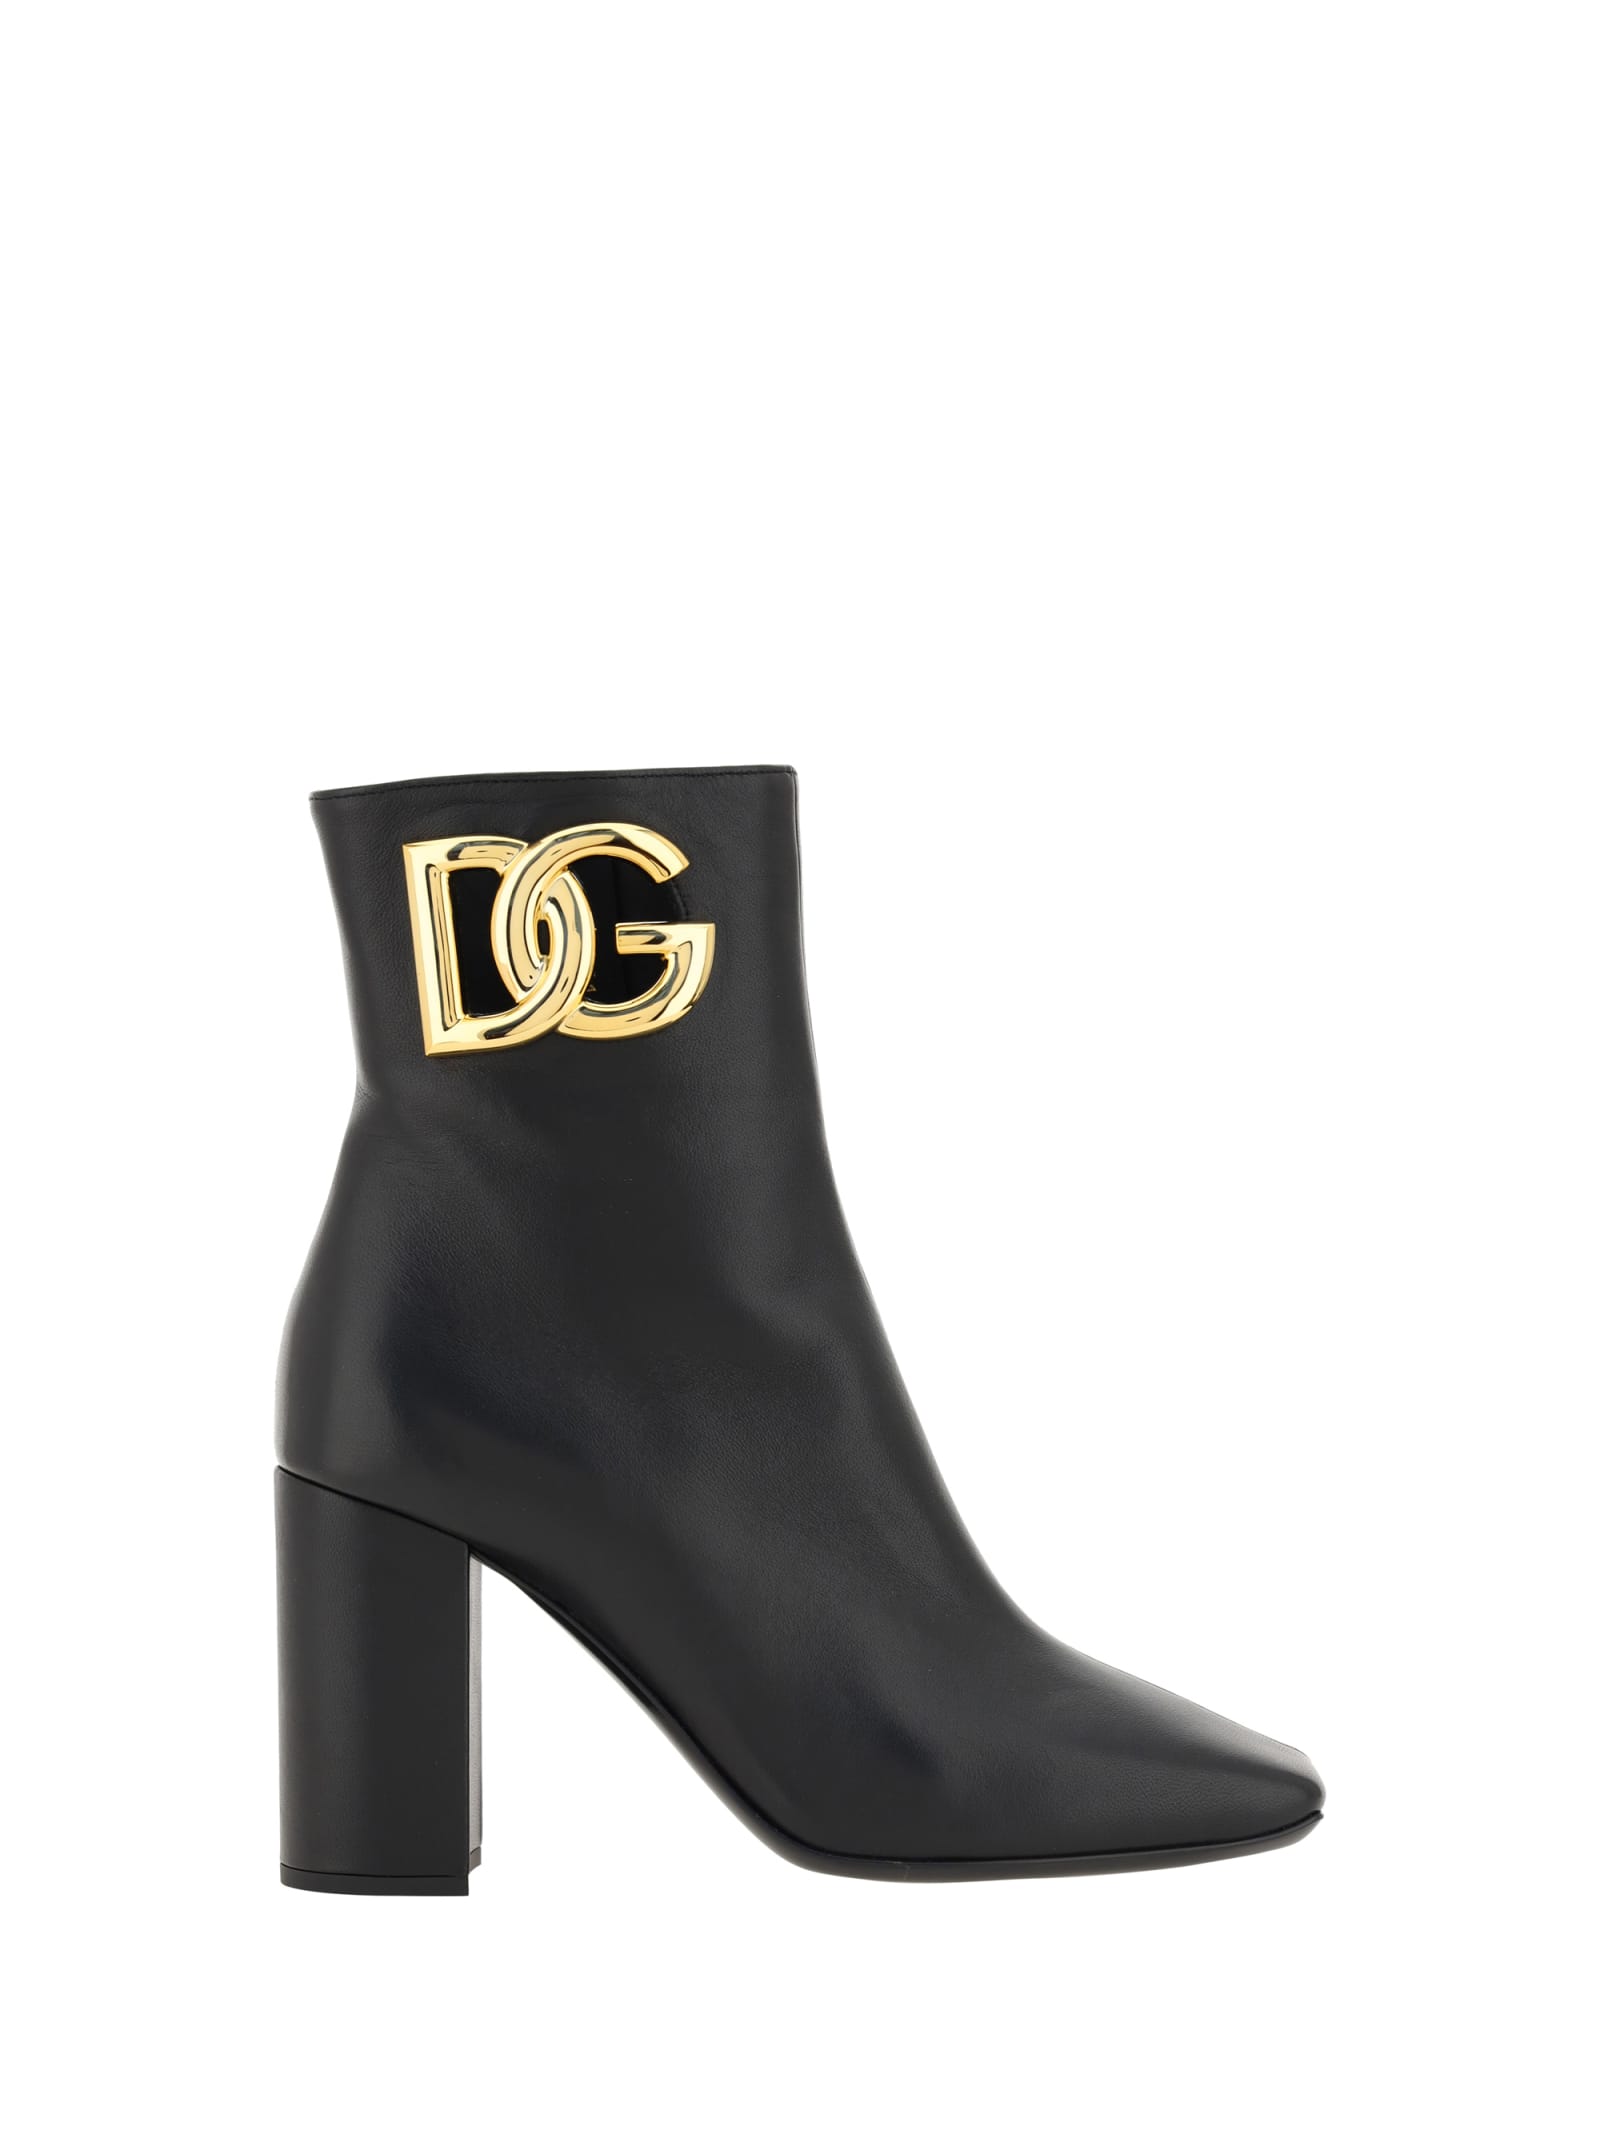 Dolce & Gabbana Heeled Ankle Boots